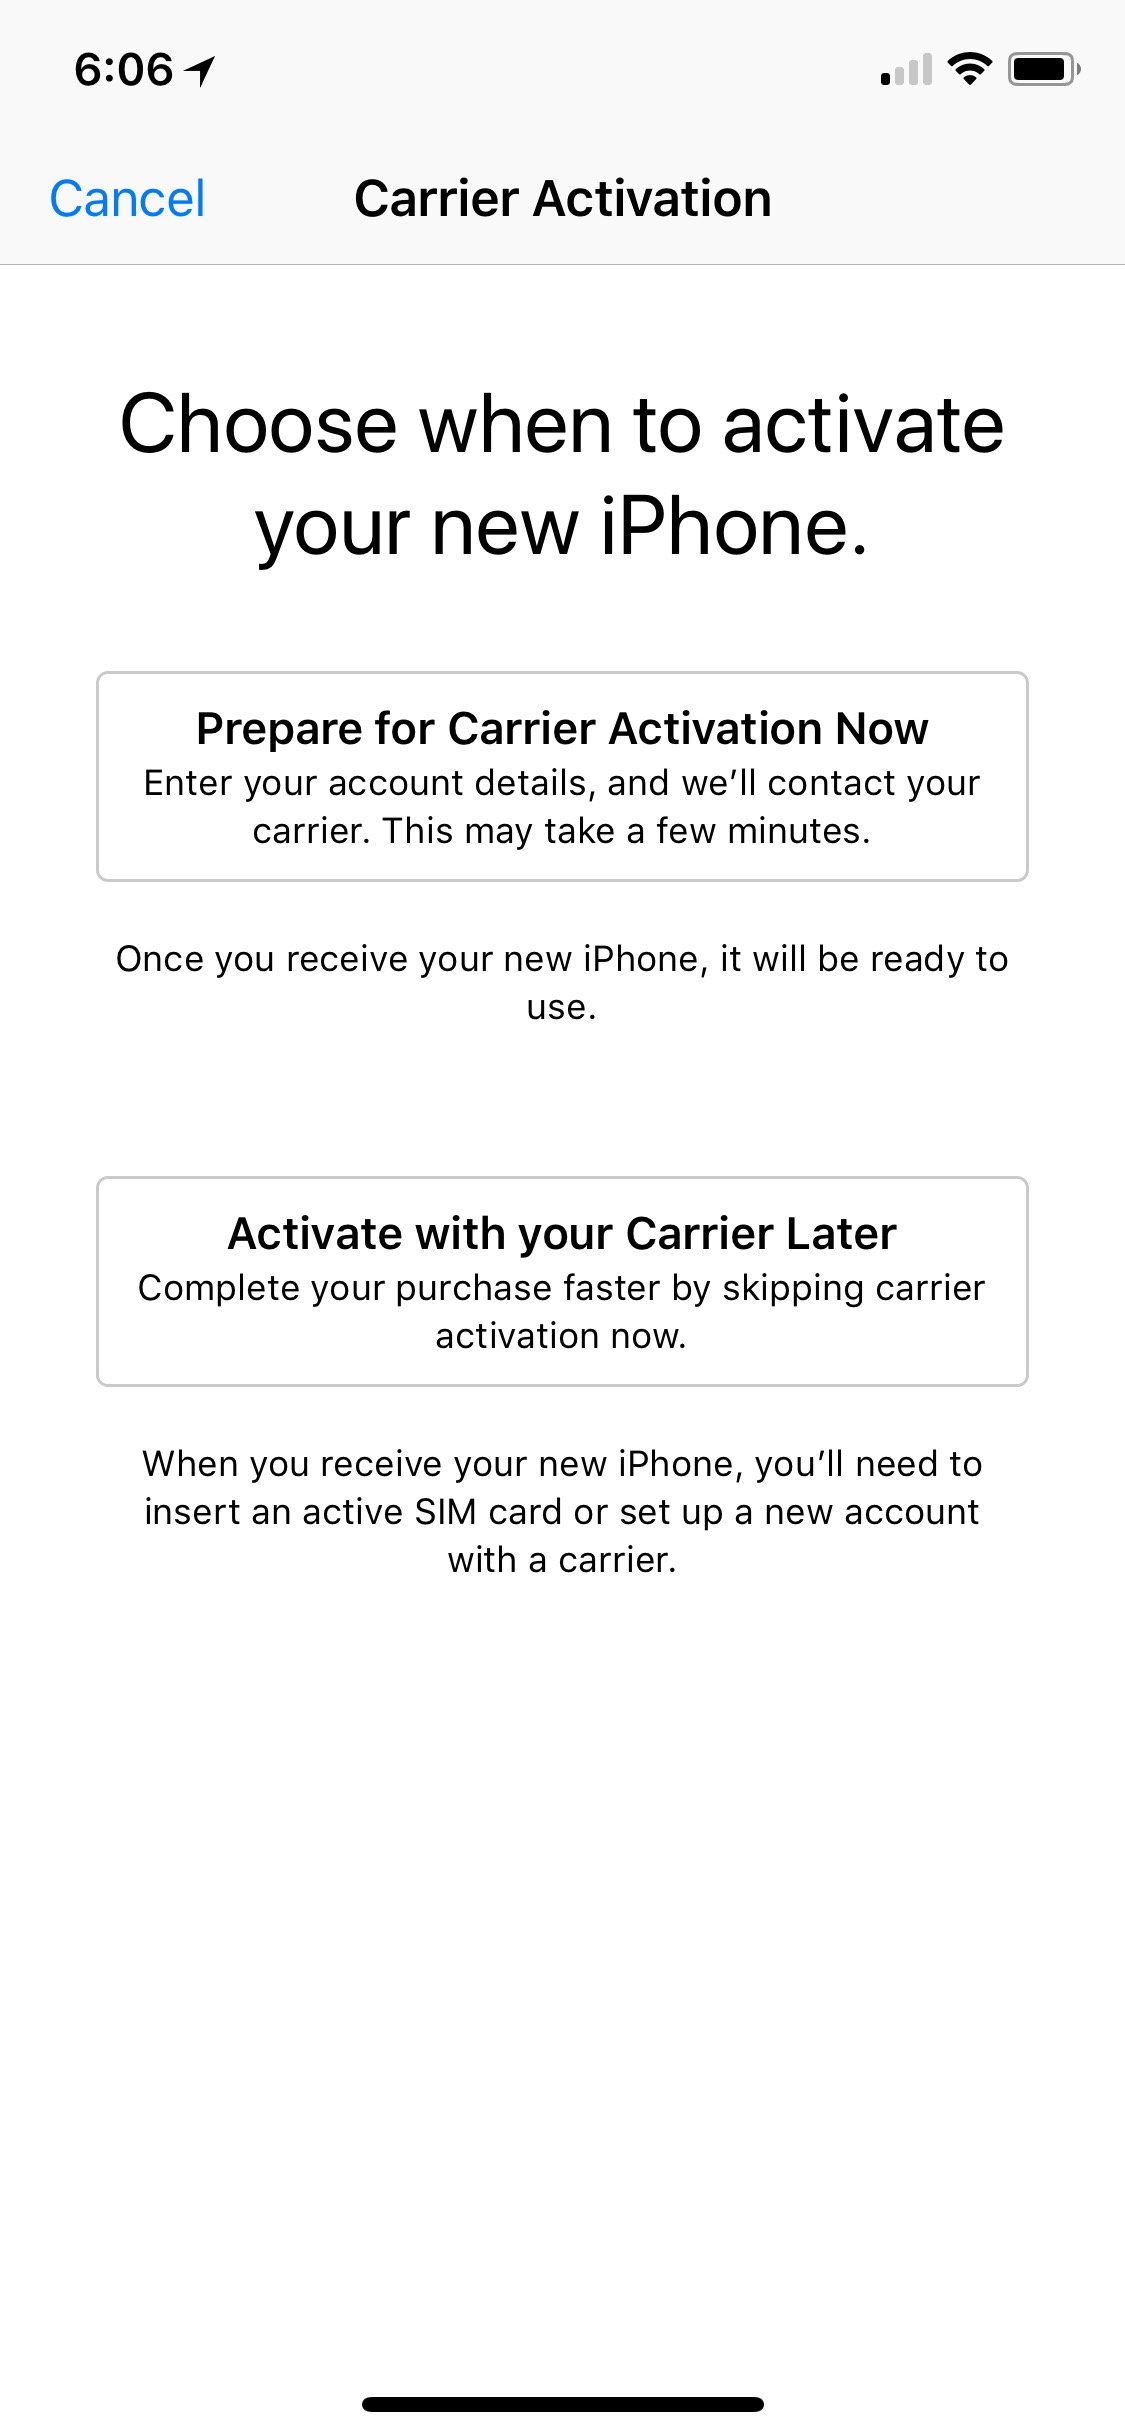 You Can Now Purchase an Unlocked iPhone X Without Carrier Activation From the Apple Online Store